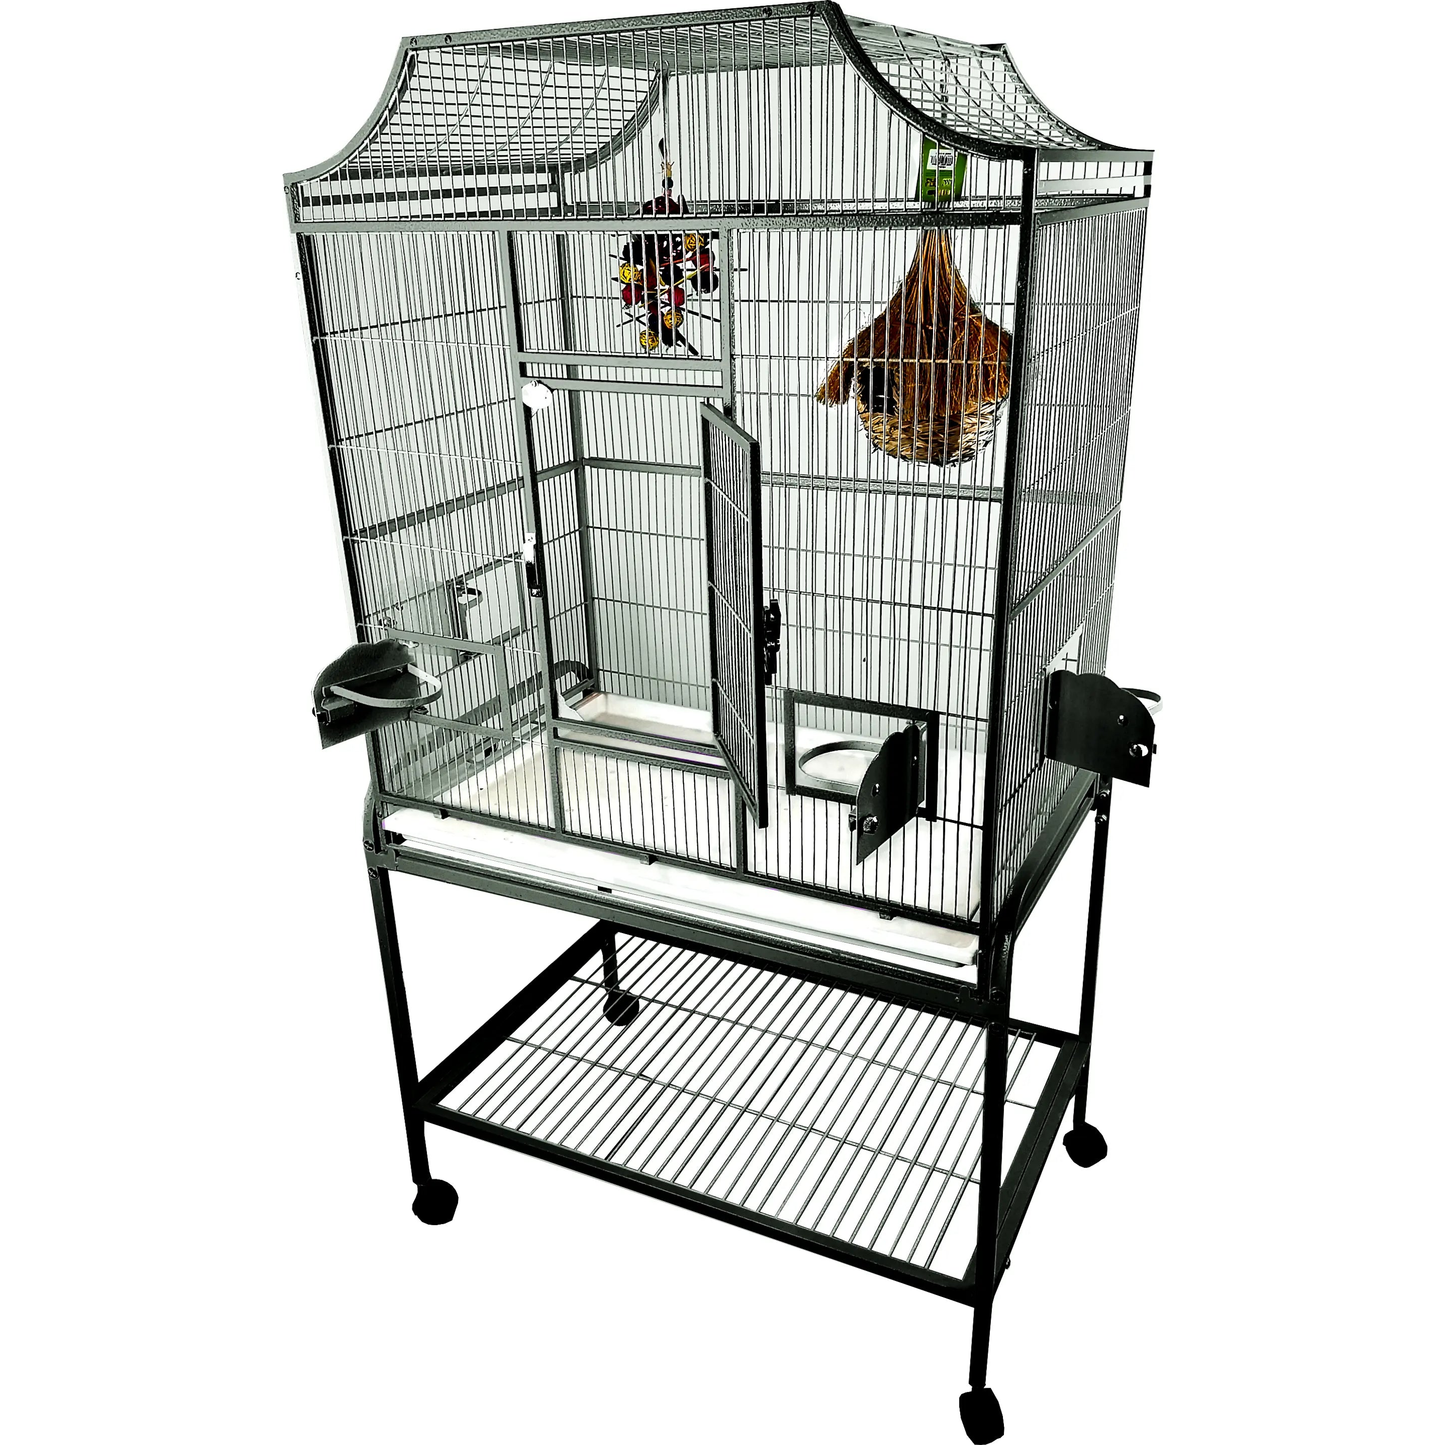 A & E Cages Elegant Style Flight Bird Cage 32In X 21 in A&E Cage Company